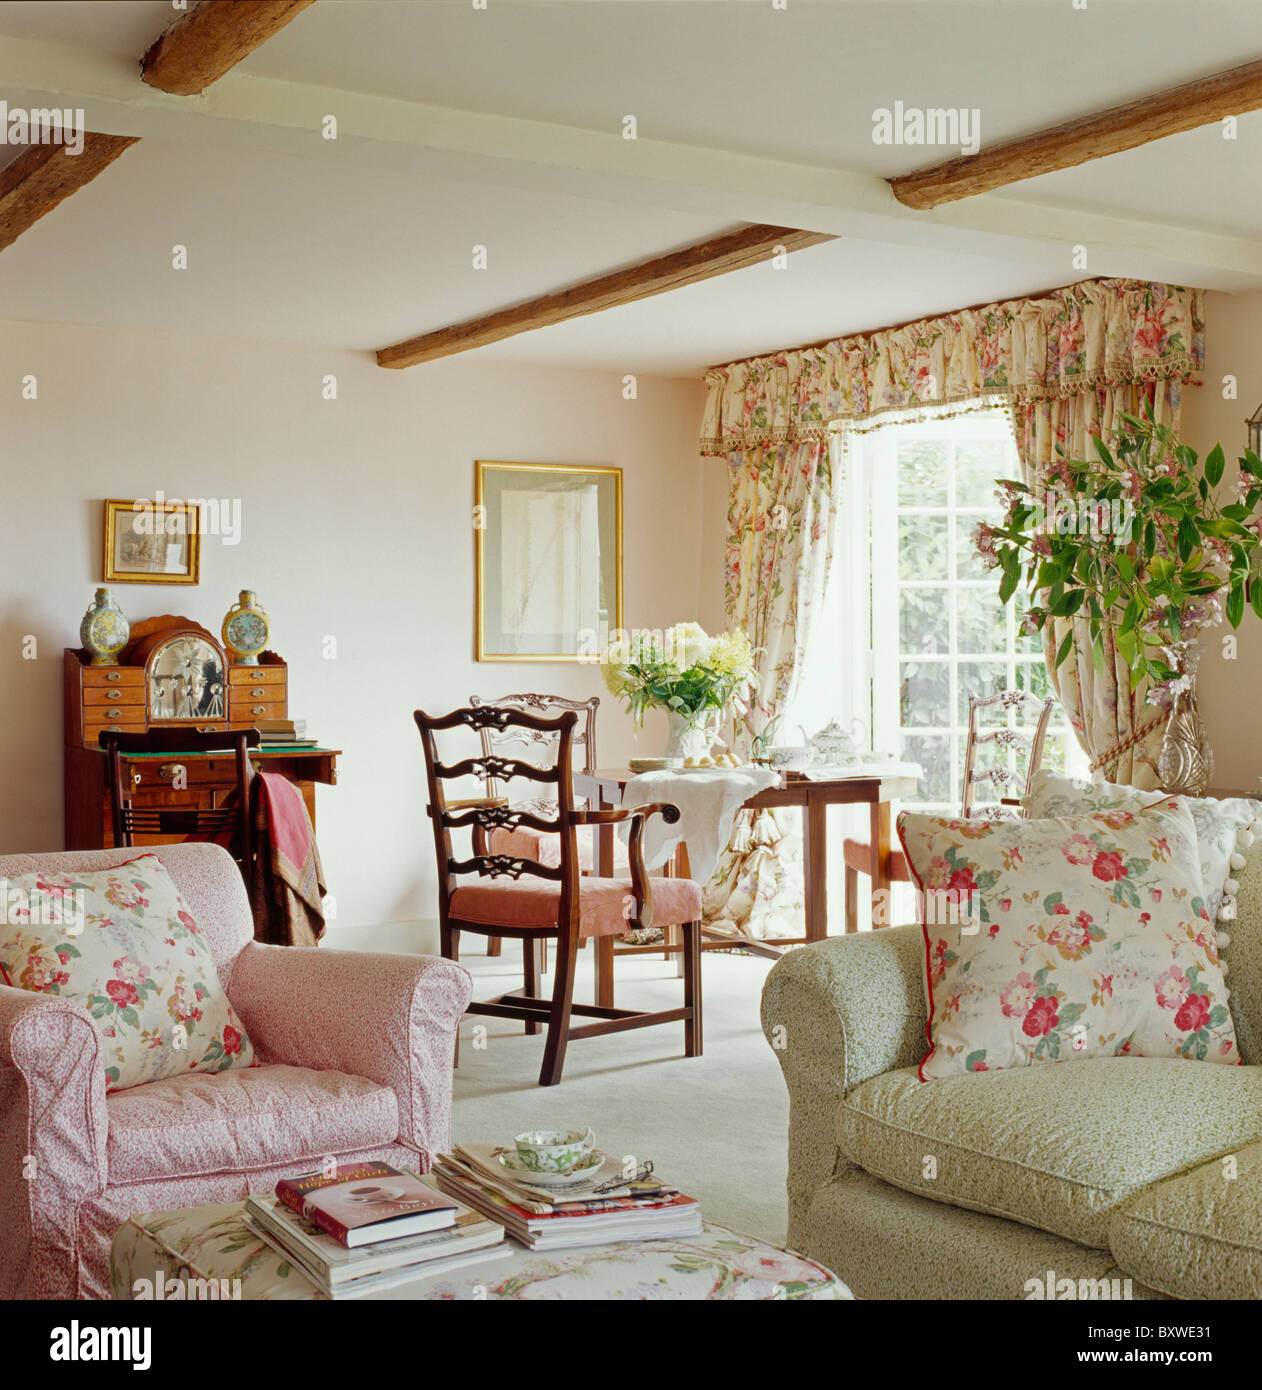 Pink Floral Cushions On Pink Armchair And Pale Green Sofa In